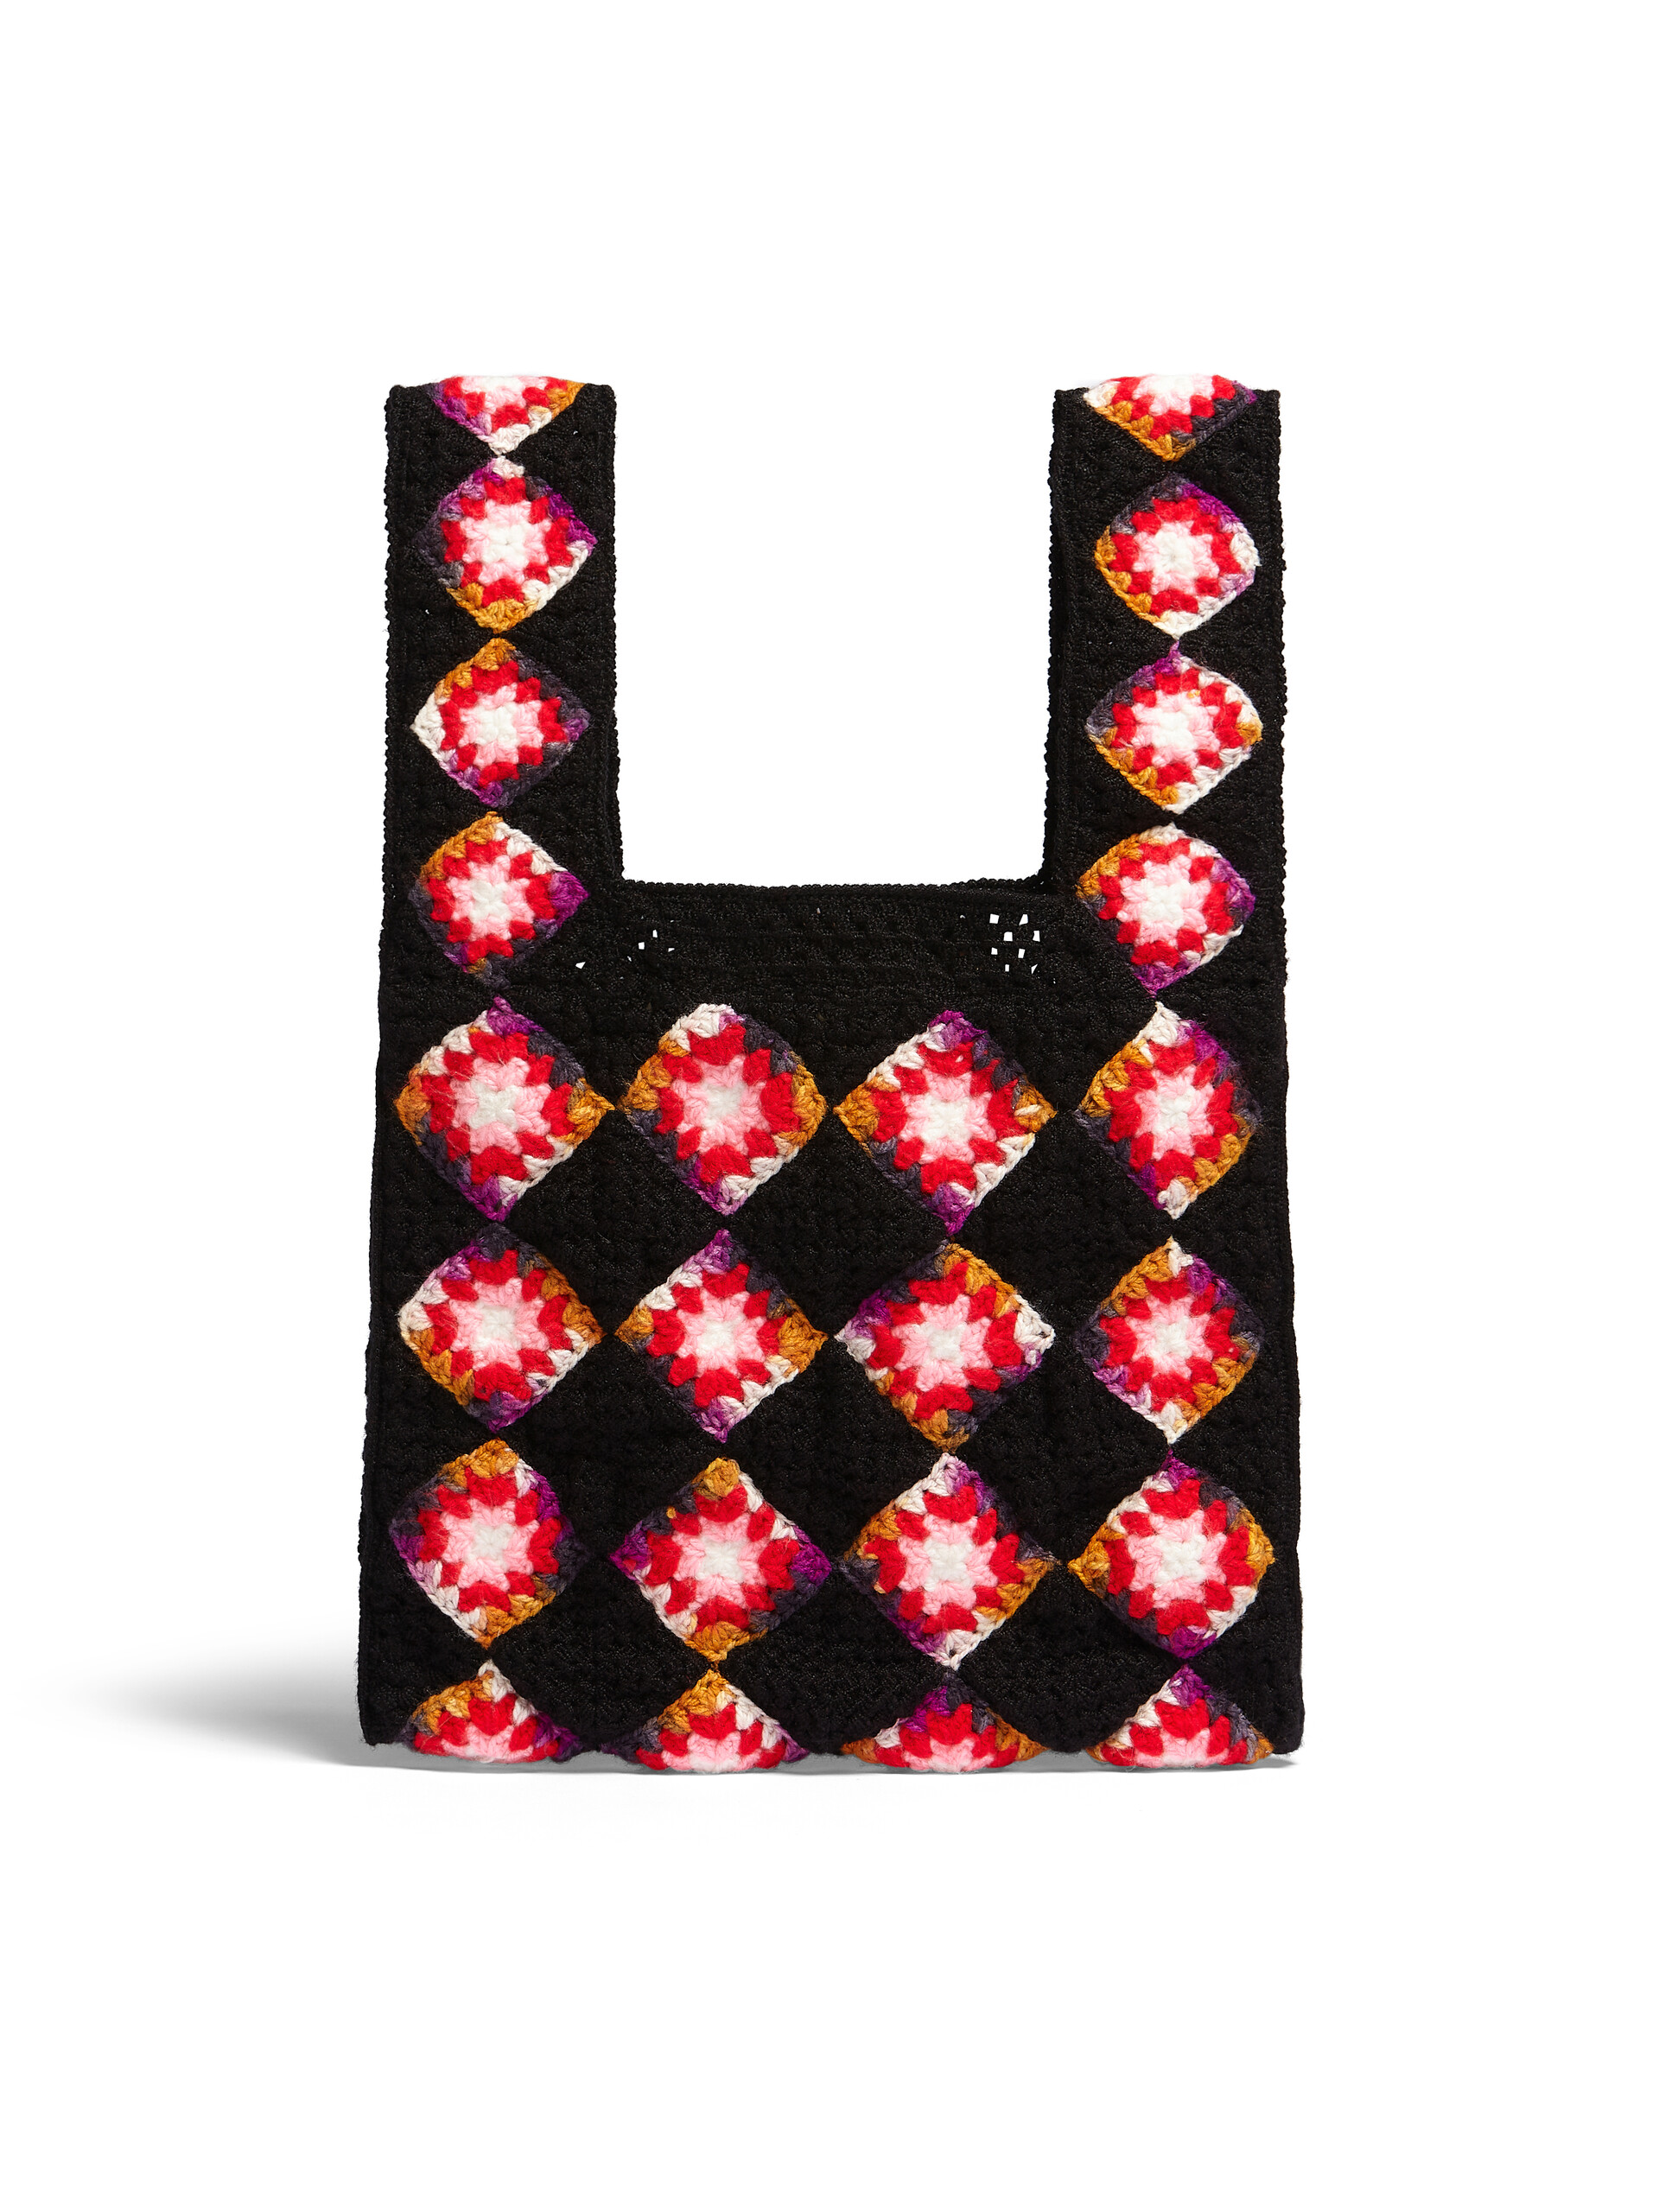 MARNI MARKET FISH in black and red crochet - Bags - Image 3